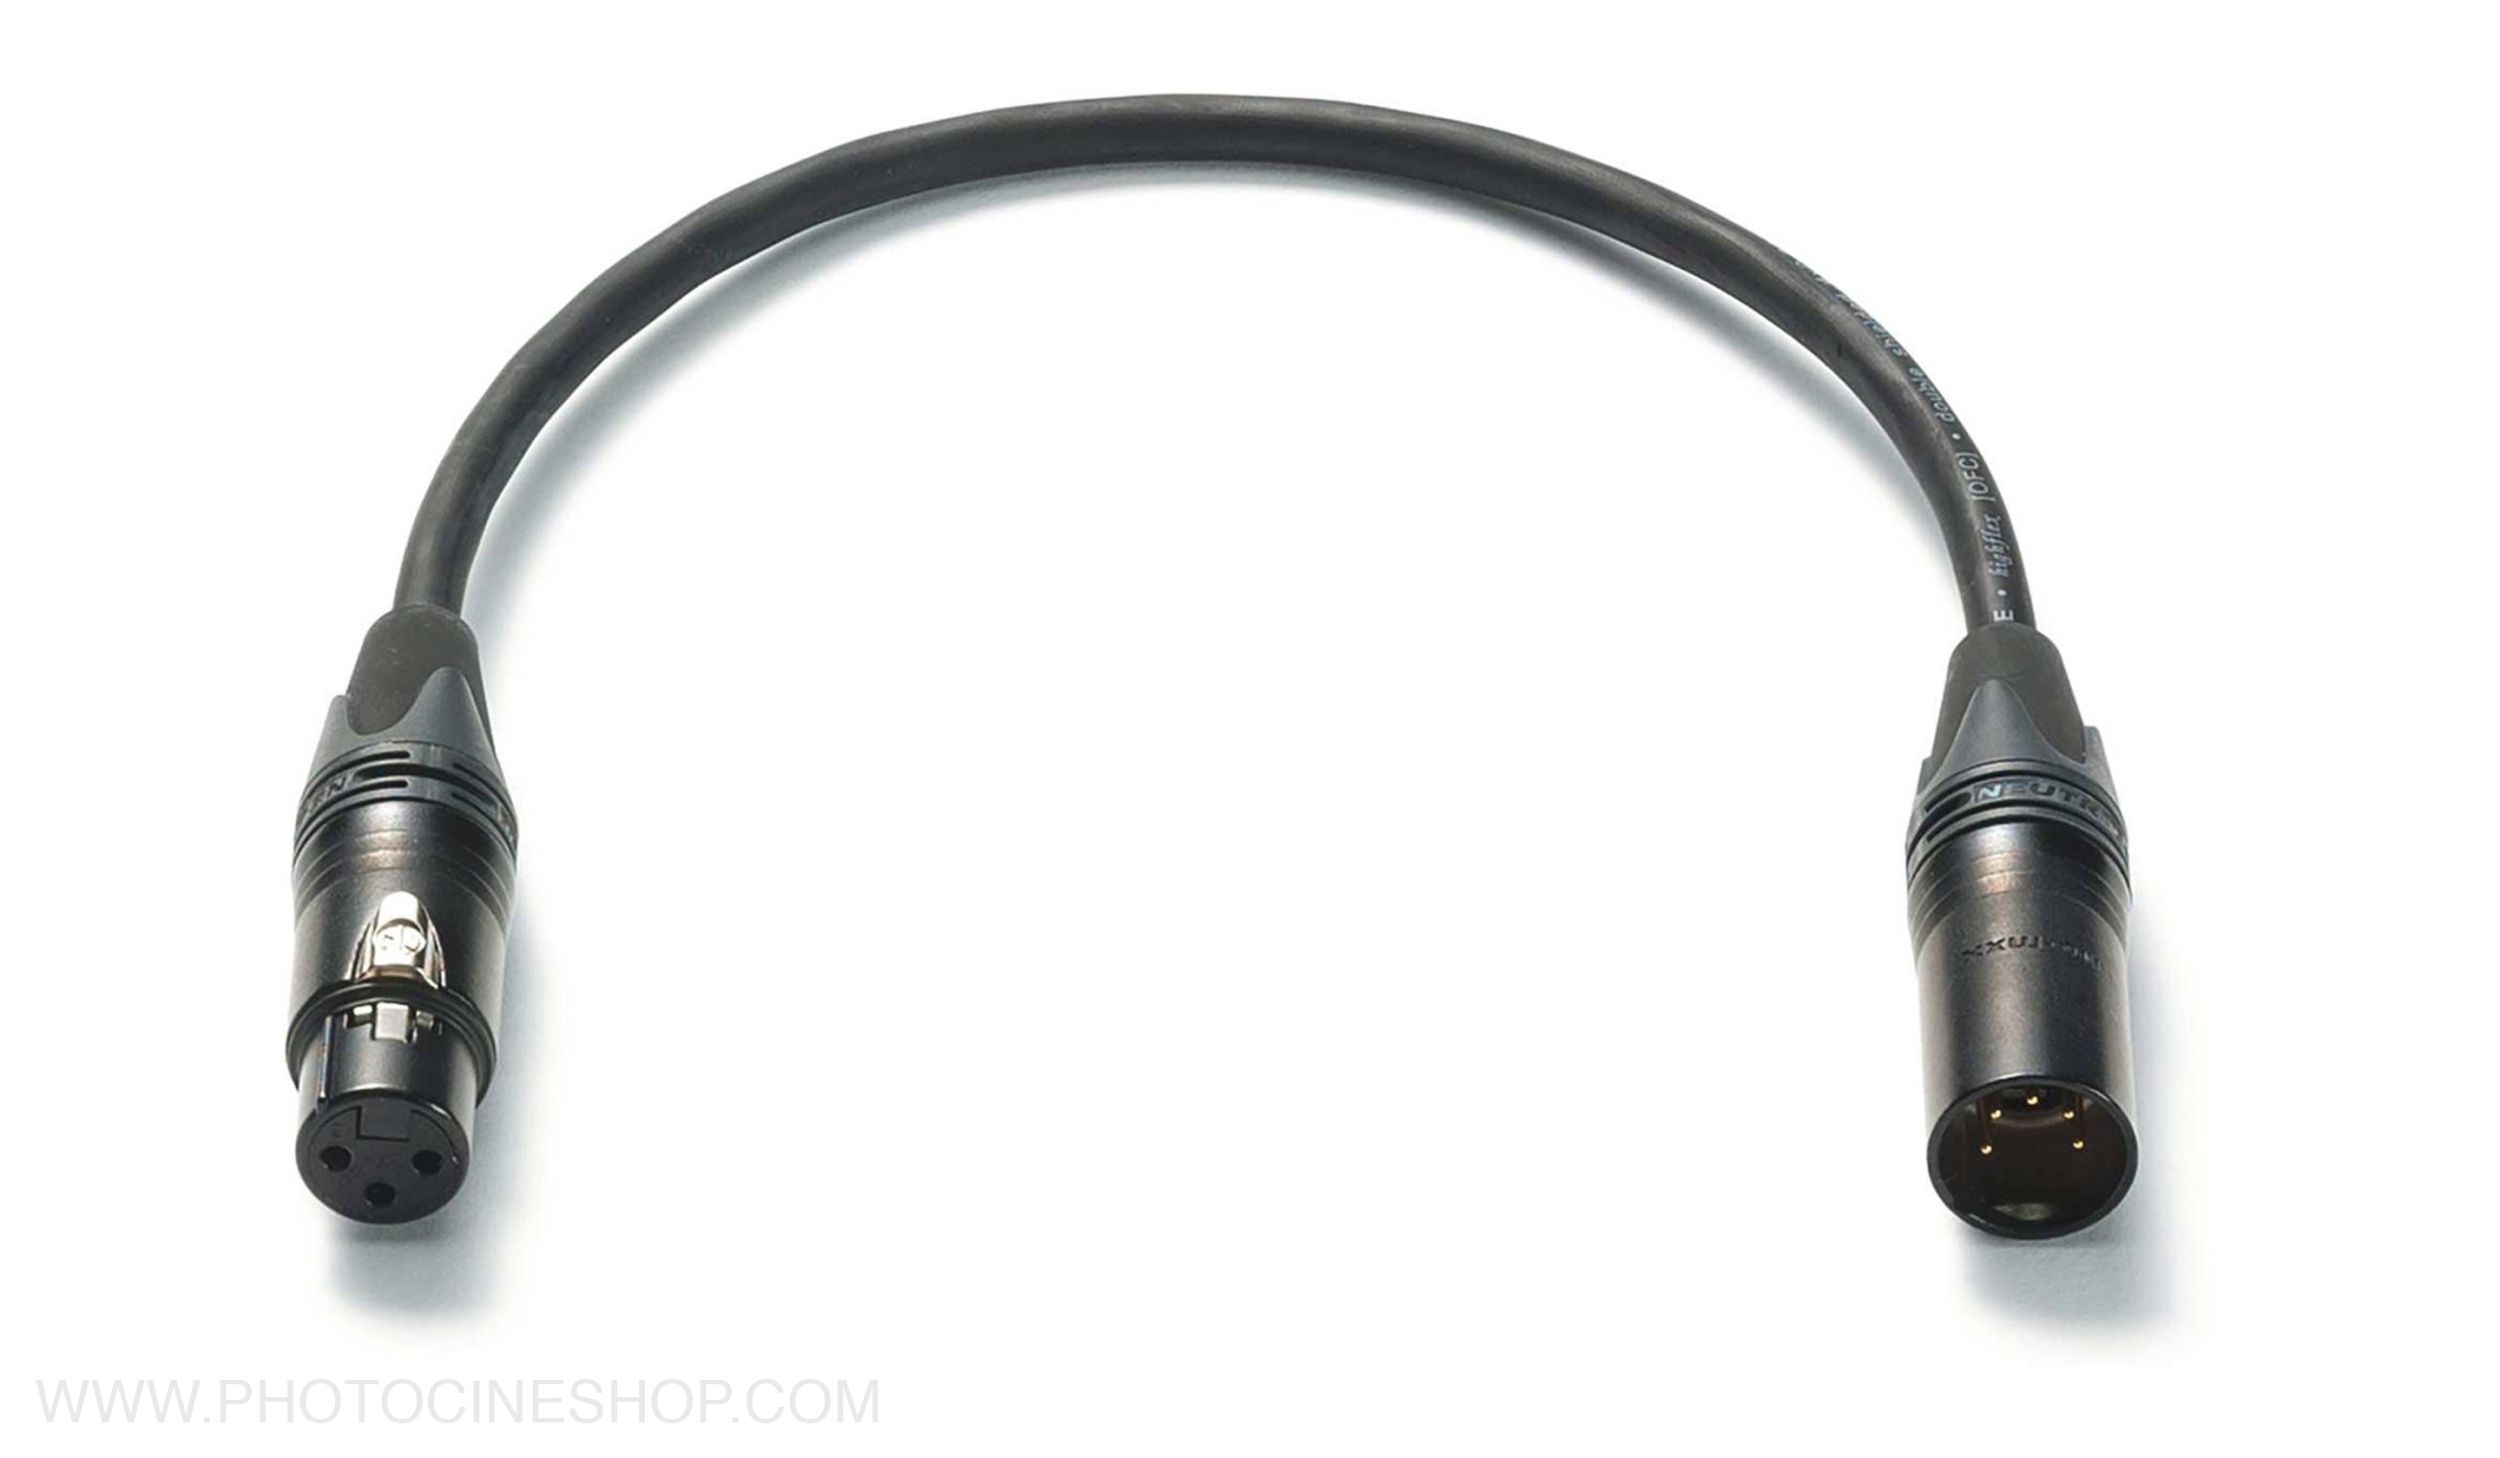 ARRI - K2.0001270 - Audio XLR Cable 5pin Male to 3pin Female Short (0.4m, 1.3 ft)